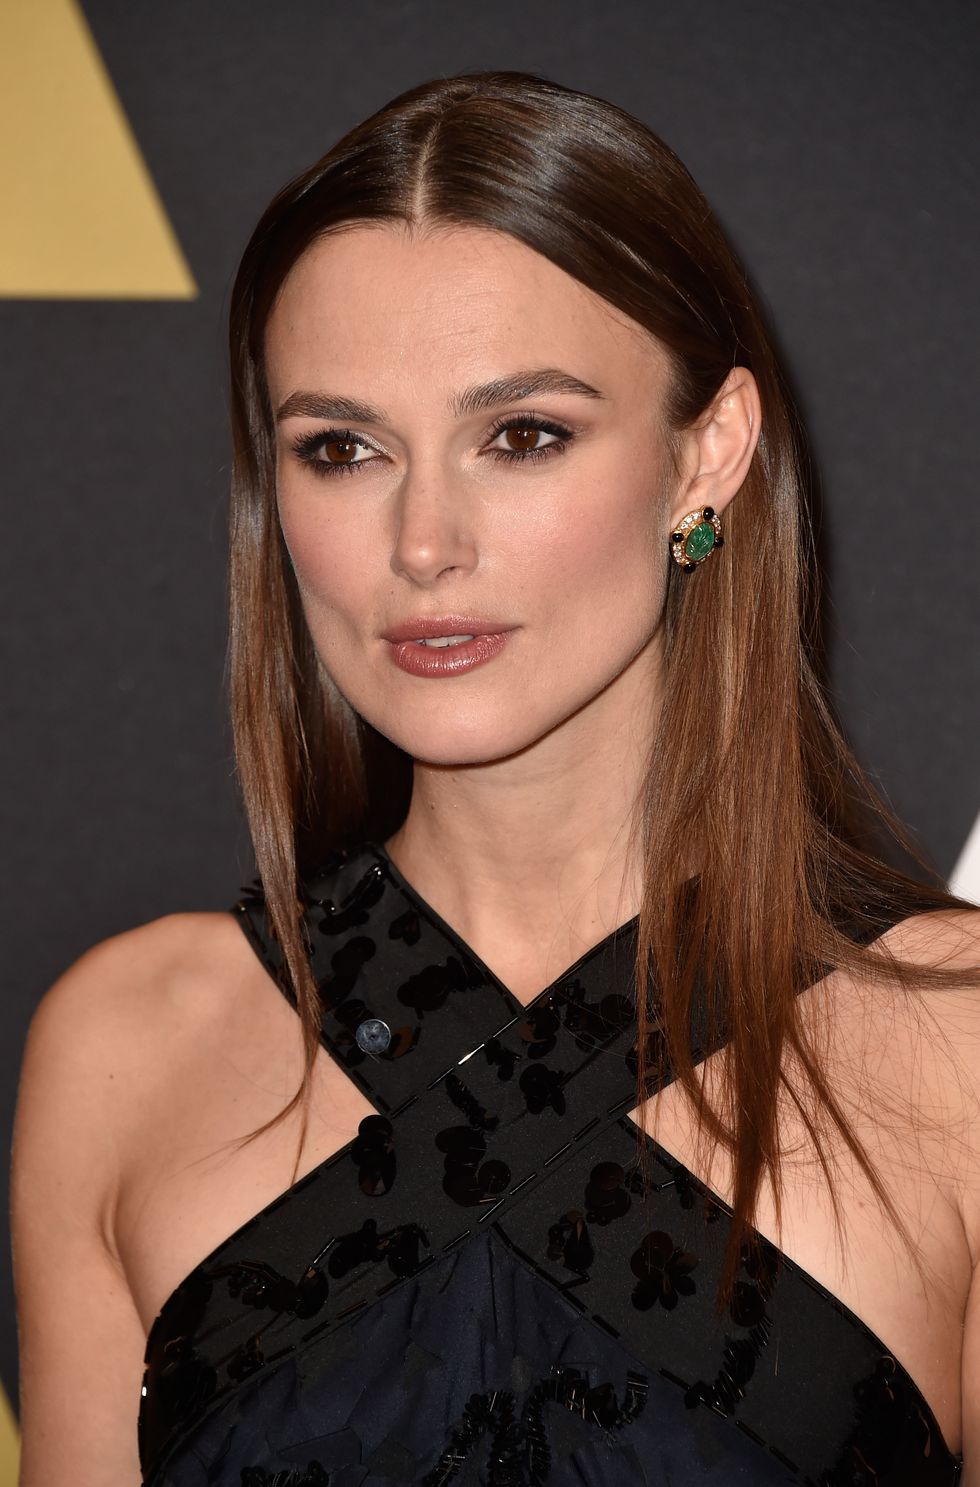 Keira Knightley wins at red carpet dressing again